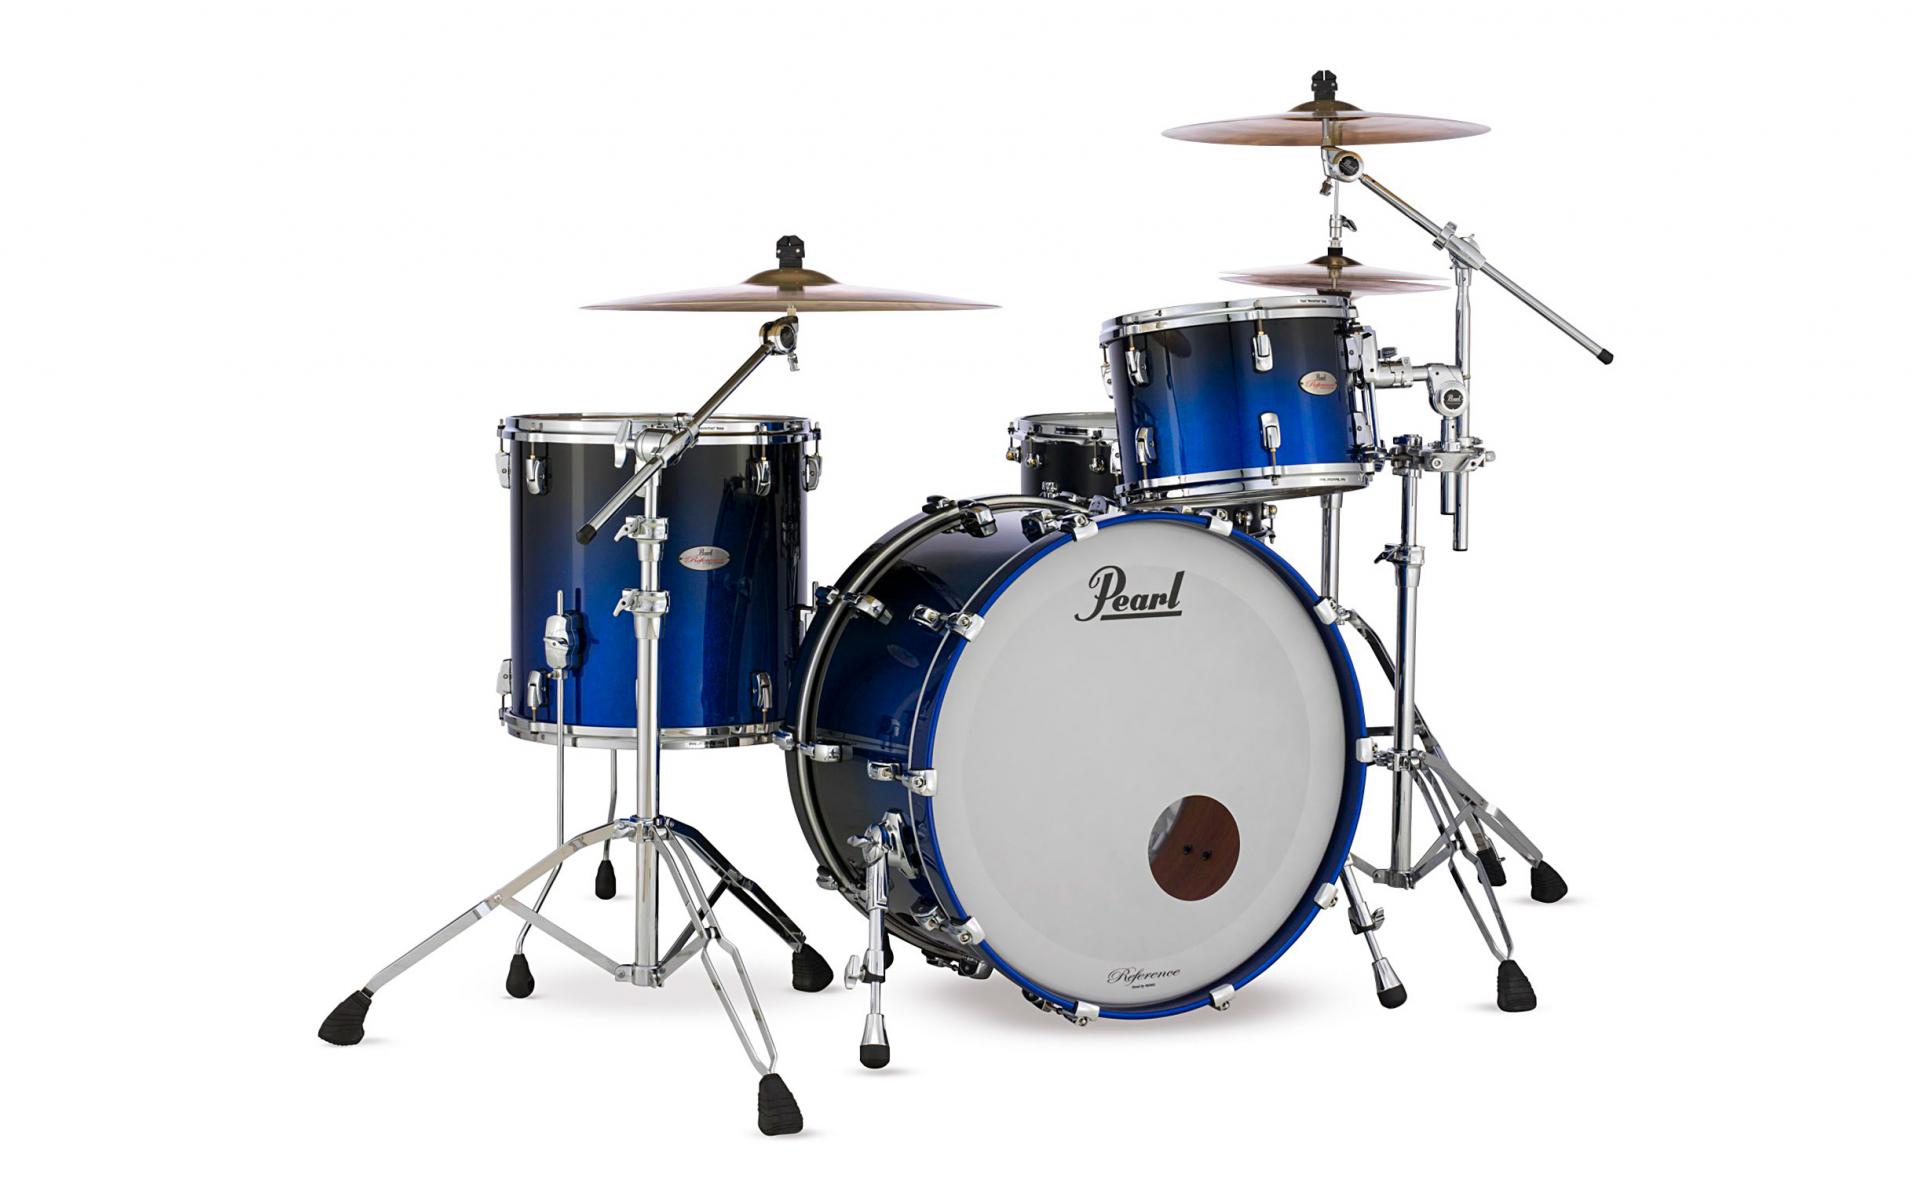 REFERENCE  Pearl Drums -Official site